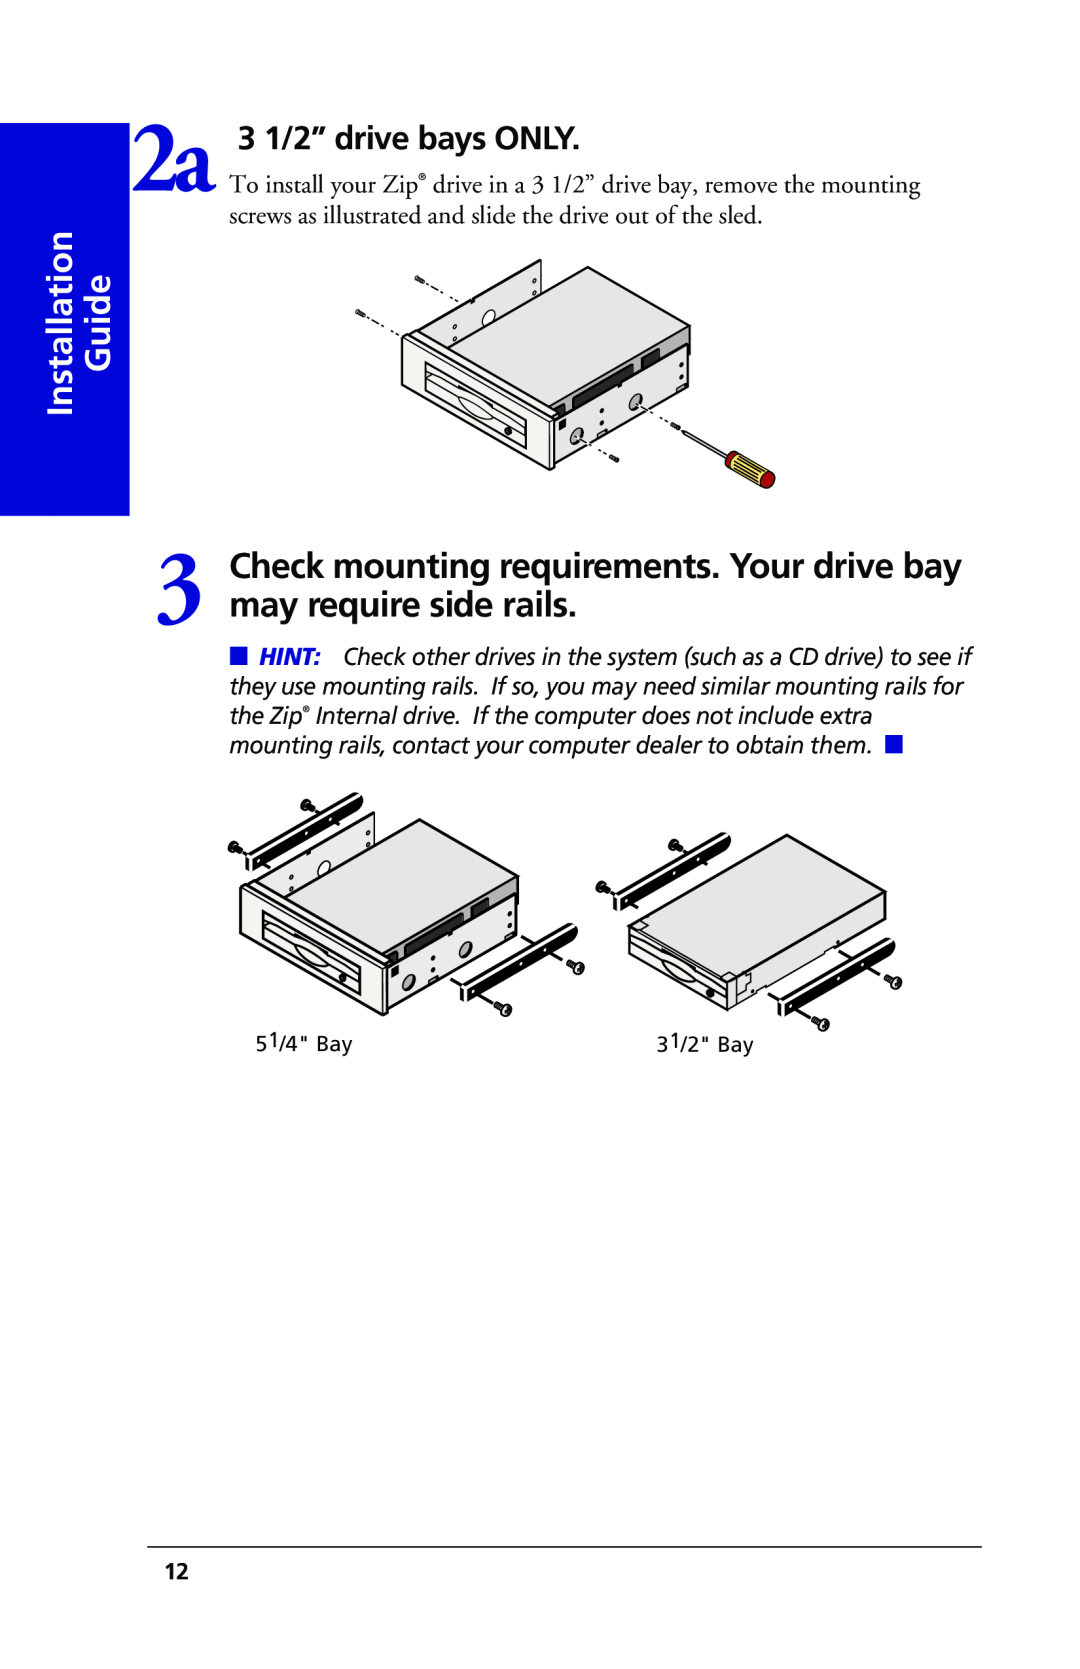 Iomega 03798300 Guide, Check mounting requirements. Your drive bay may require side rails, 3 1/2” drive bays ONLY 